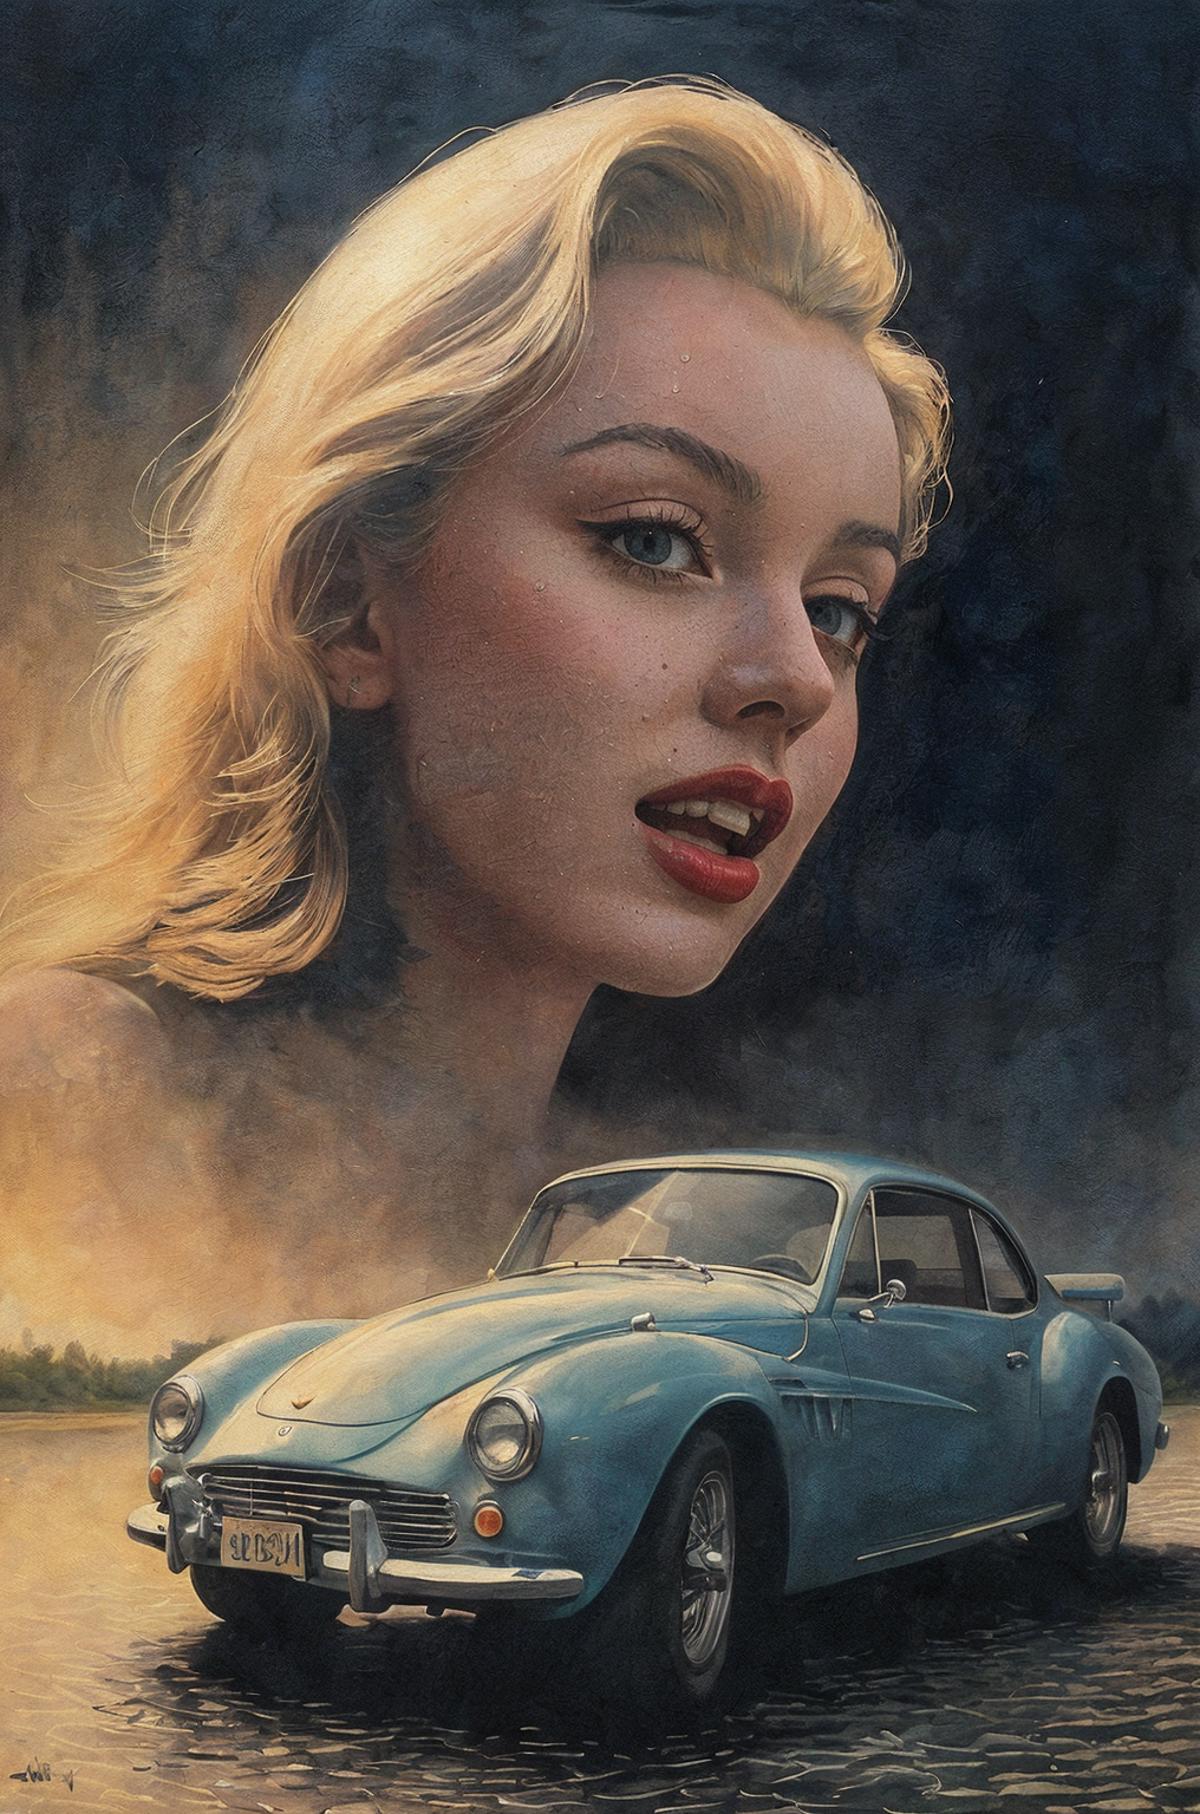 A painting of a woman with a blue car in the background.